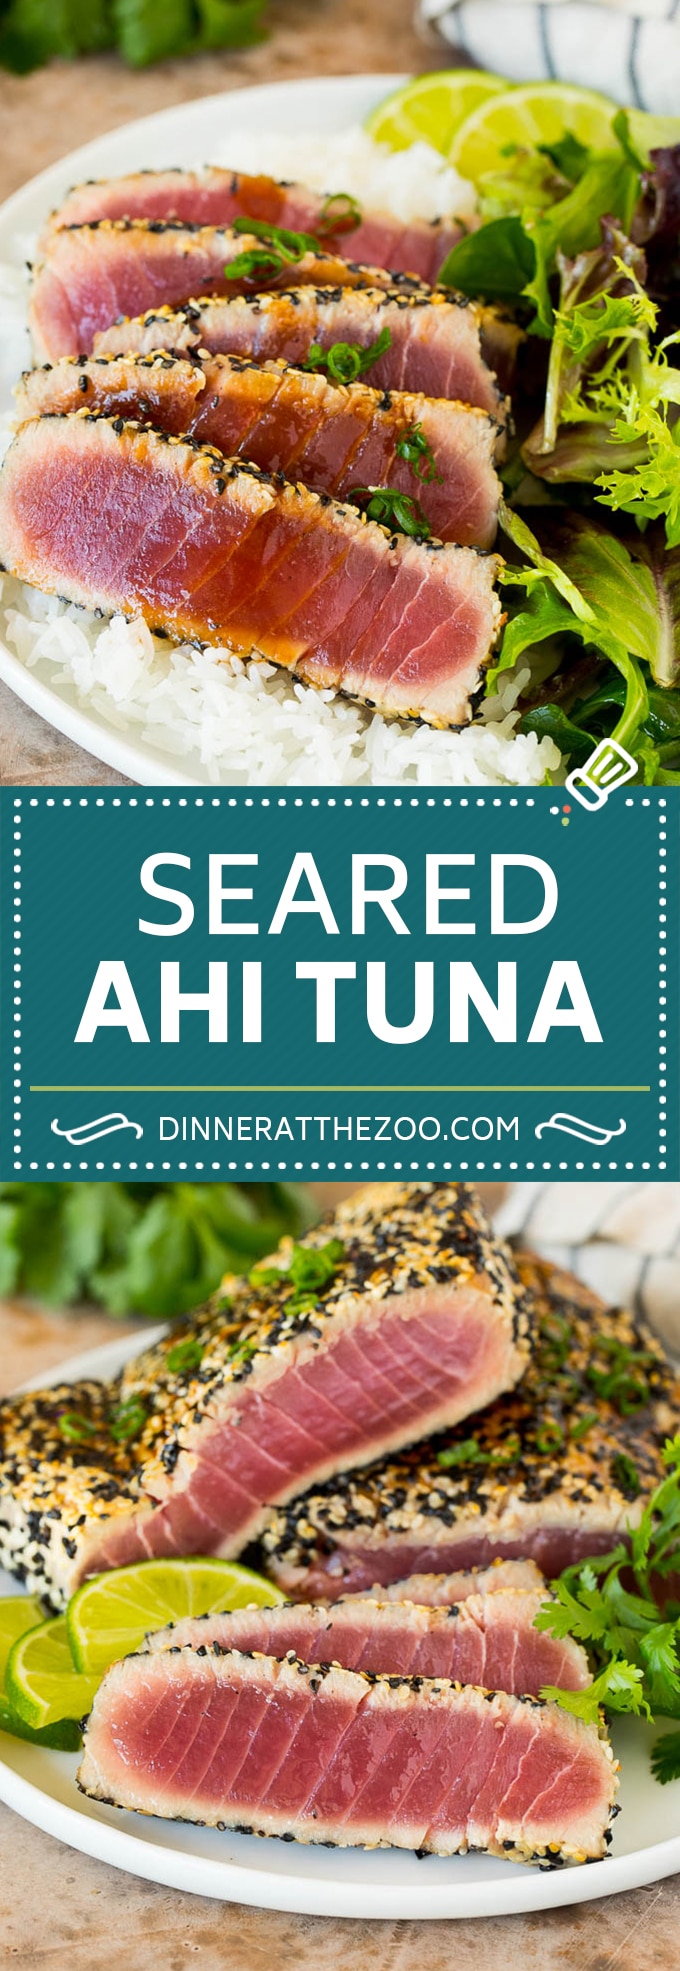 This seared ahi tuna recipe is sashimi grade fish coated in sesame seeds, then briefly cooked to tender and flavorful perfection.